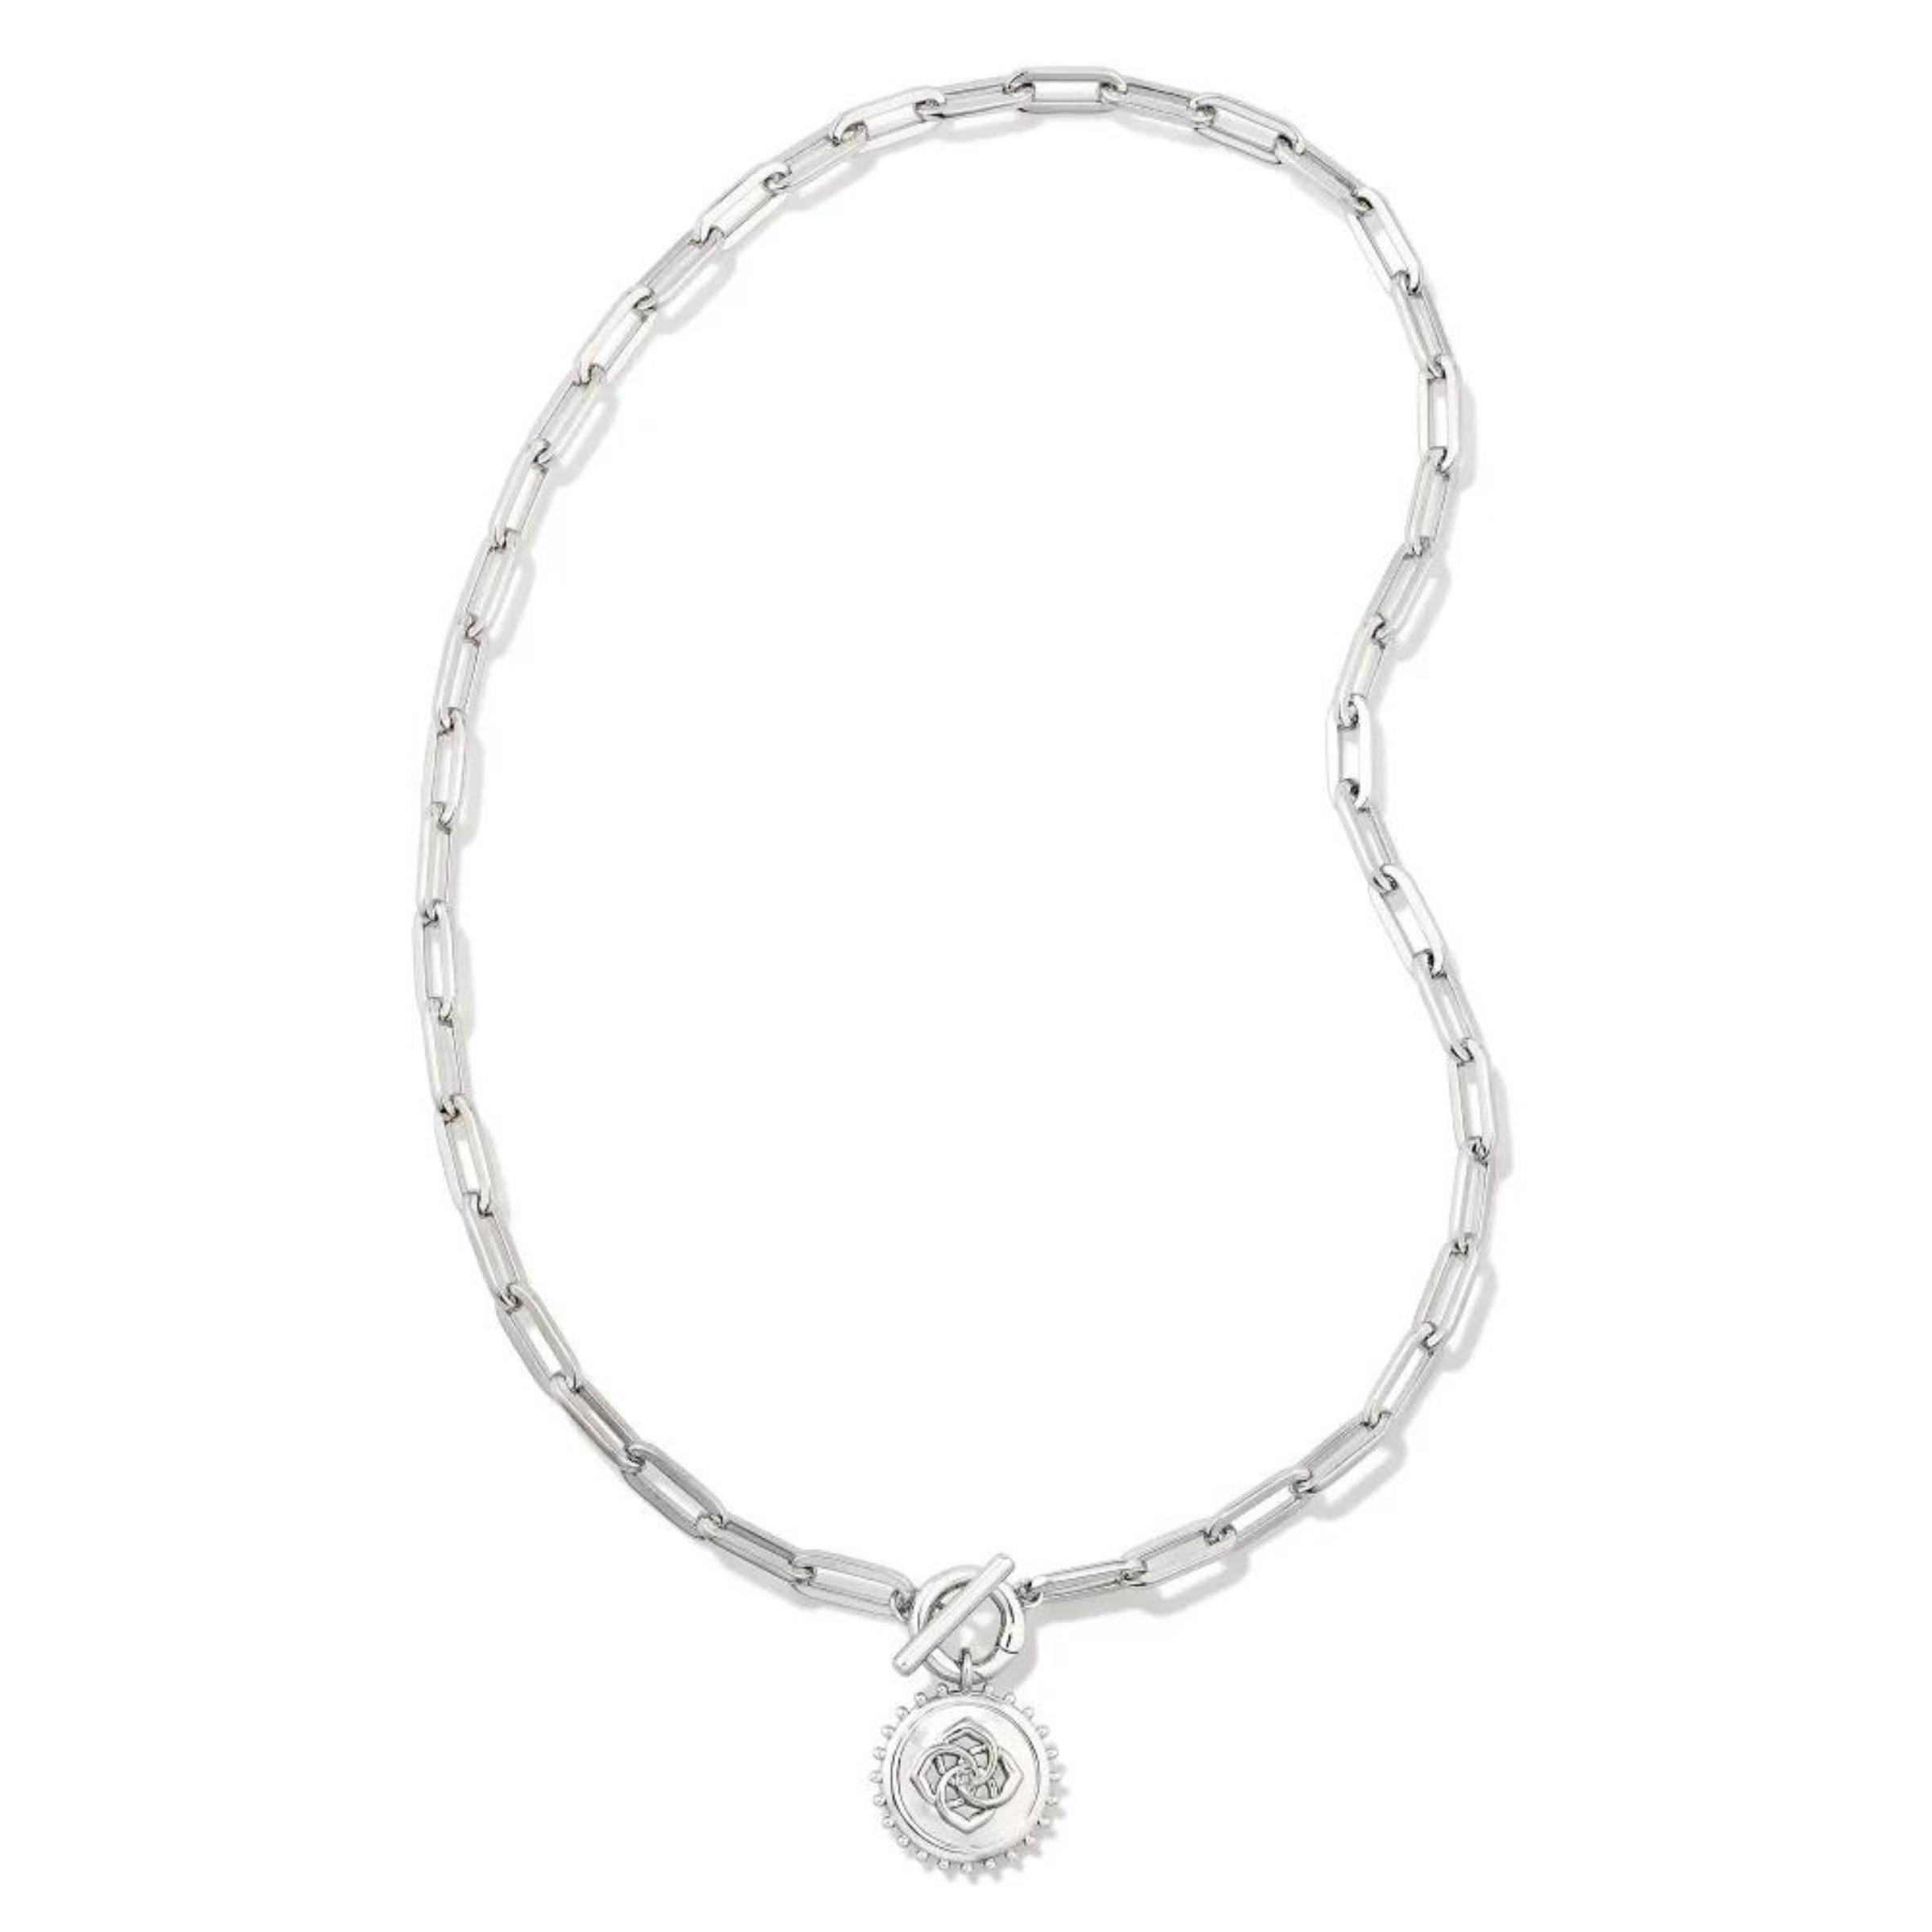 Silver, paperclip chain necklace with a toggle front clasp. This necklace also includes a silver medallion charm. This necklace is pictured on a white background. 